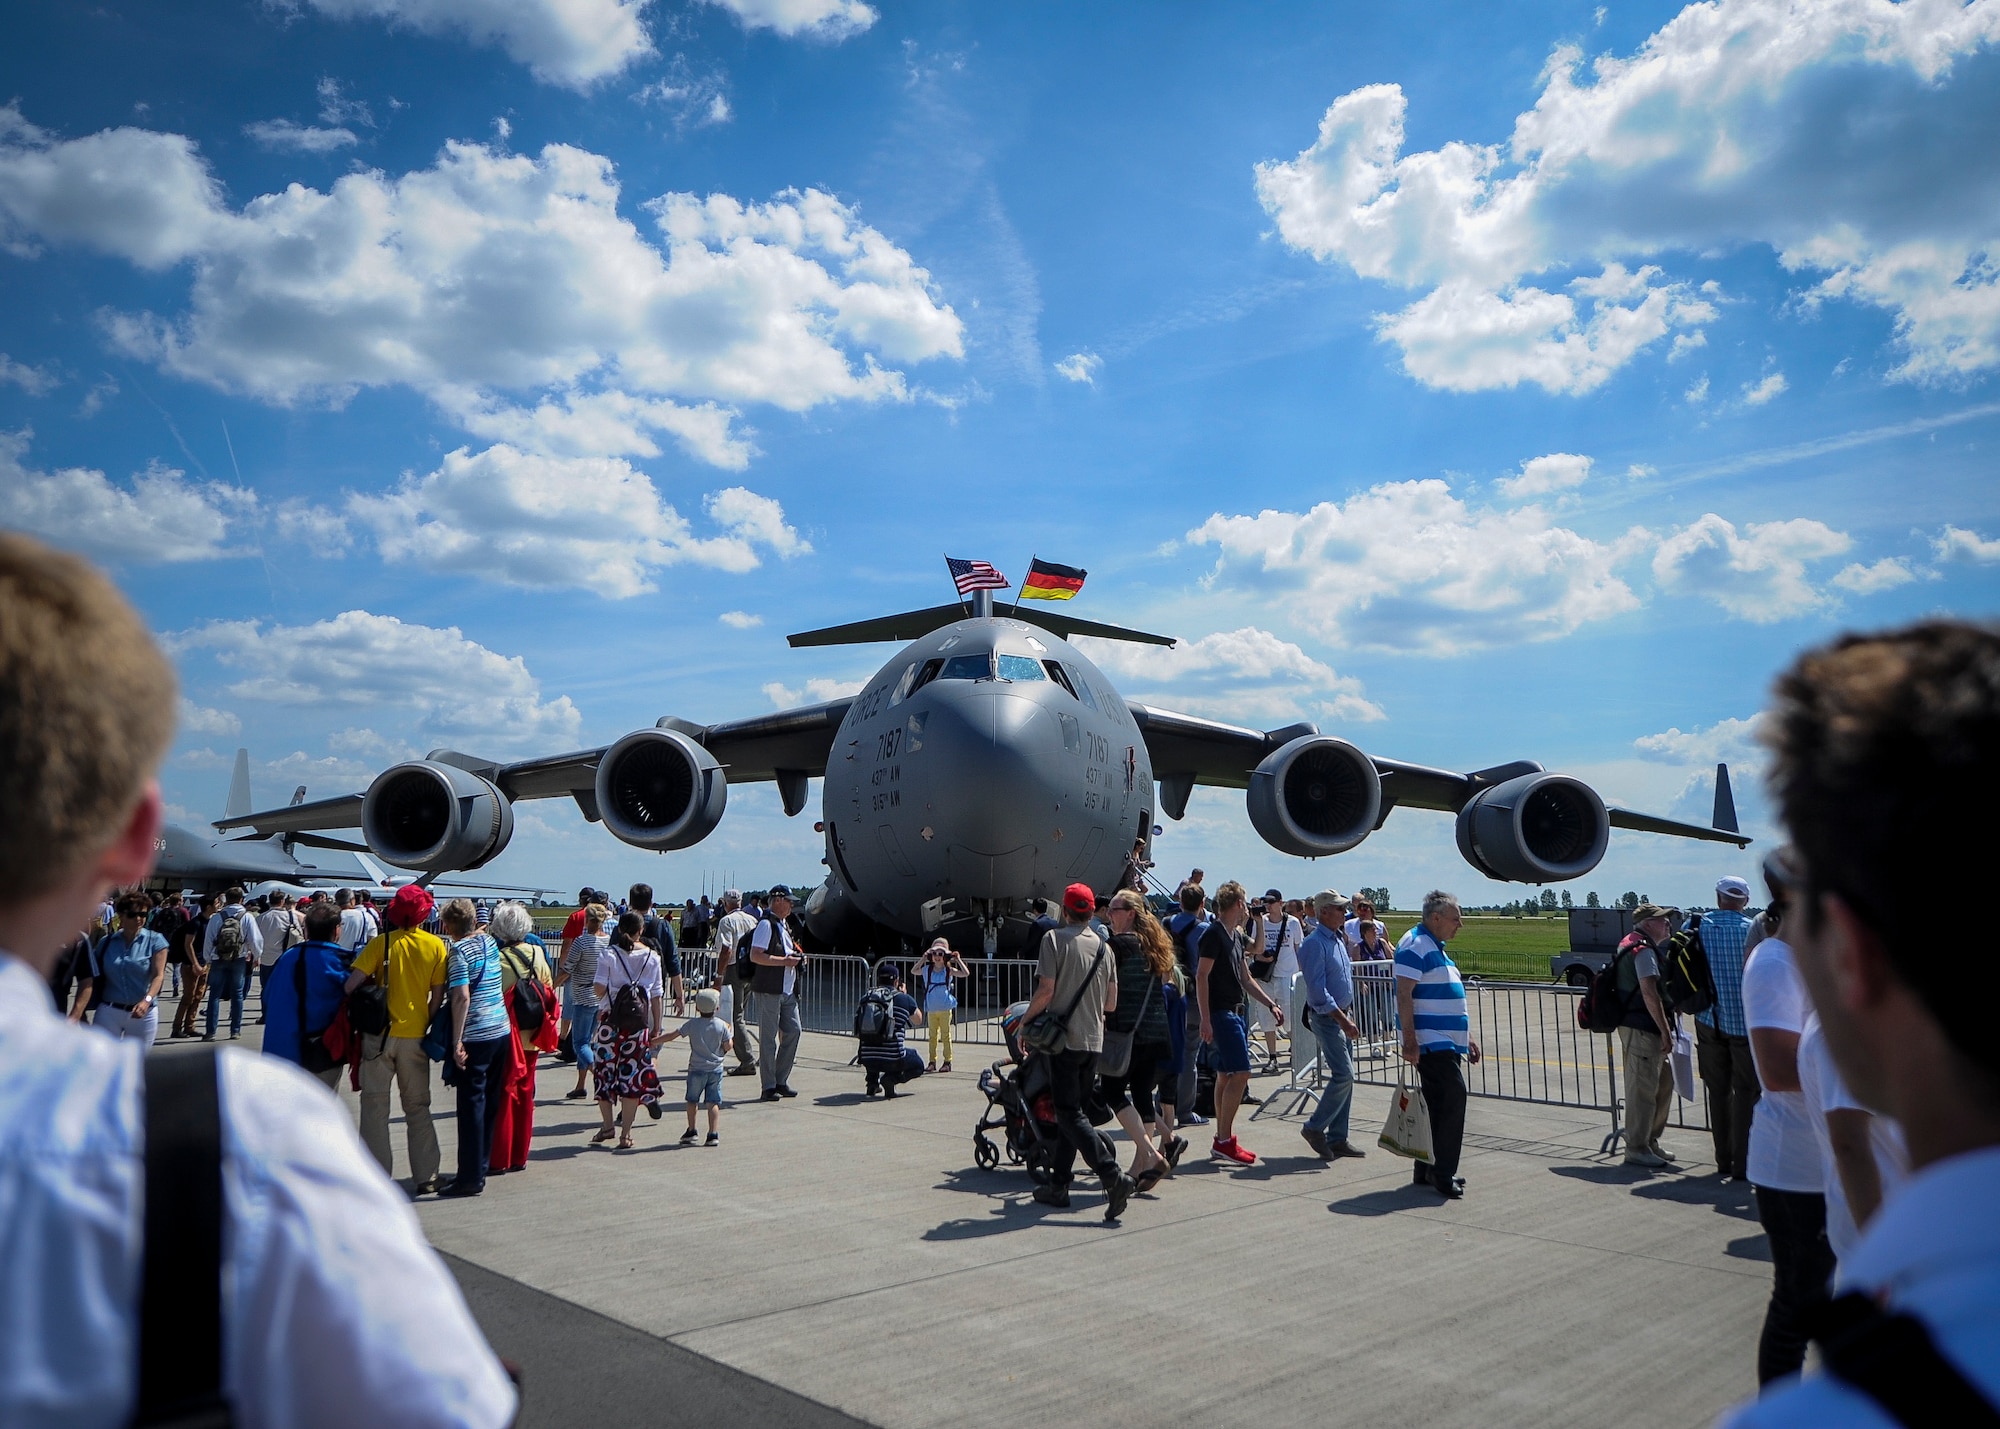 The Spirit of Berlin C-17 Globemaster III towers over onlookers at the 2016 Berlin Airshow June 3. The show had approximately 230,000 visitors and exhibitors from more than 65 countries. (U.S. Air Force photo by Senior Airman Tom Brading)